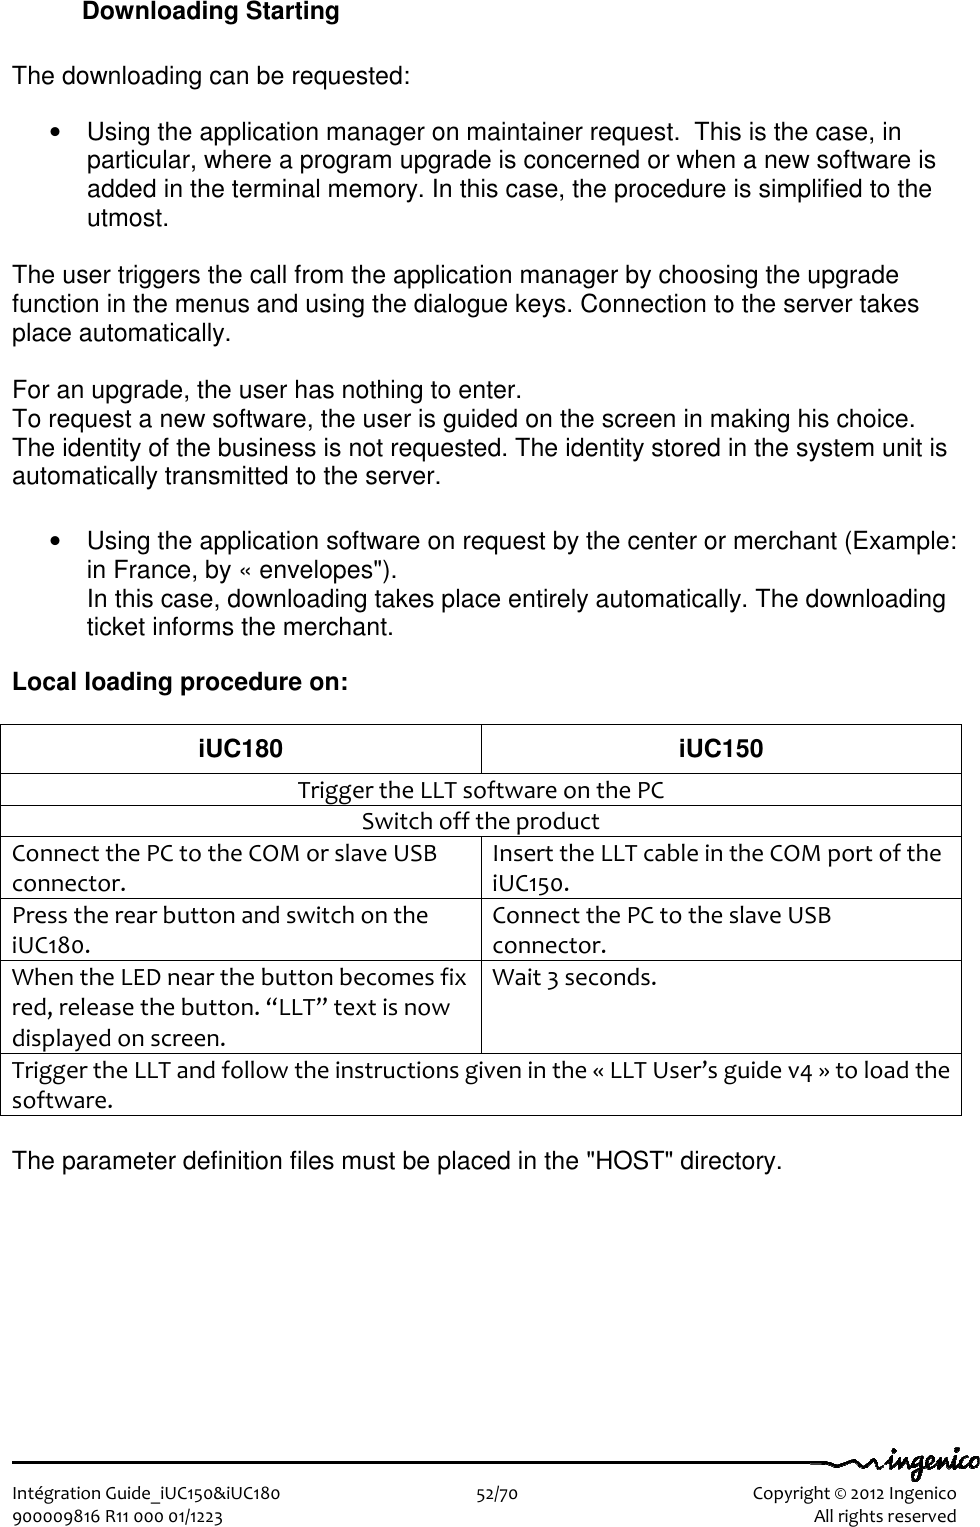   Intégration Guide_iUC150&amp;iUC180                        52/70    Copyright © 2012 Ingenico 900009816 R11 000 01/1223    All rights reserved Downloading Starting  The downloading can be requested:   •  Using the application manager on maintainer request.  This is the case, in particular, where a program upgrade is concerned or when a new software is added in the terminal memory. In this case, the procedure is simplified to the utmost.  The user triggers the call from the application manager by choosing the upgrade function in the menus and using the dialogue keys. Connection to the server takes place automatically.  For an upgrade, the user has nothing to enter. To request a new software, the user is guided on the screen in making his choice. The identity of the business is not requested. The identity stored in the system unit is automatically transmitted to the server.   •  Using the application software on request by the center or merchant (Example: in France, by « envelopes&quot;).  In this case, downloading takes place entirely automatically. The downloading ticket informs the merchant.   Local loading procedure on:   iUC180  iUC150 Trigger the LLT software on the PC Switch off the product Connect the PC to the COM or slave USB connector. Insert the LLT cable in the COM port of the iUC150. Press the rear button and switch on the iUC180. Connect the PC to the slave USB connector. When the LED near the button becomes fix red, release the button. “LLT” text is now displayed on screen. Wait 3 seconds. Trigger the LLT and follow the instructions given in the « LLT User’s guide v4 » to load the software.  The parameter definition files must be placed in the &quot;HOST&quot; directory.   